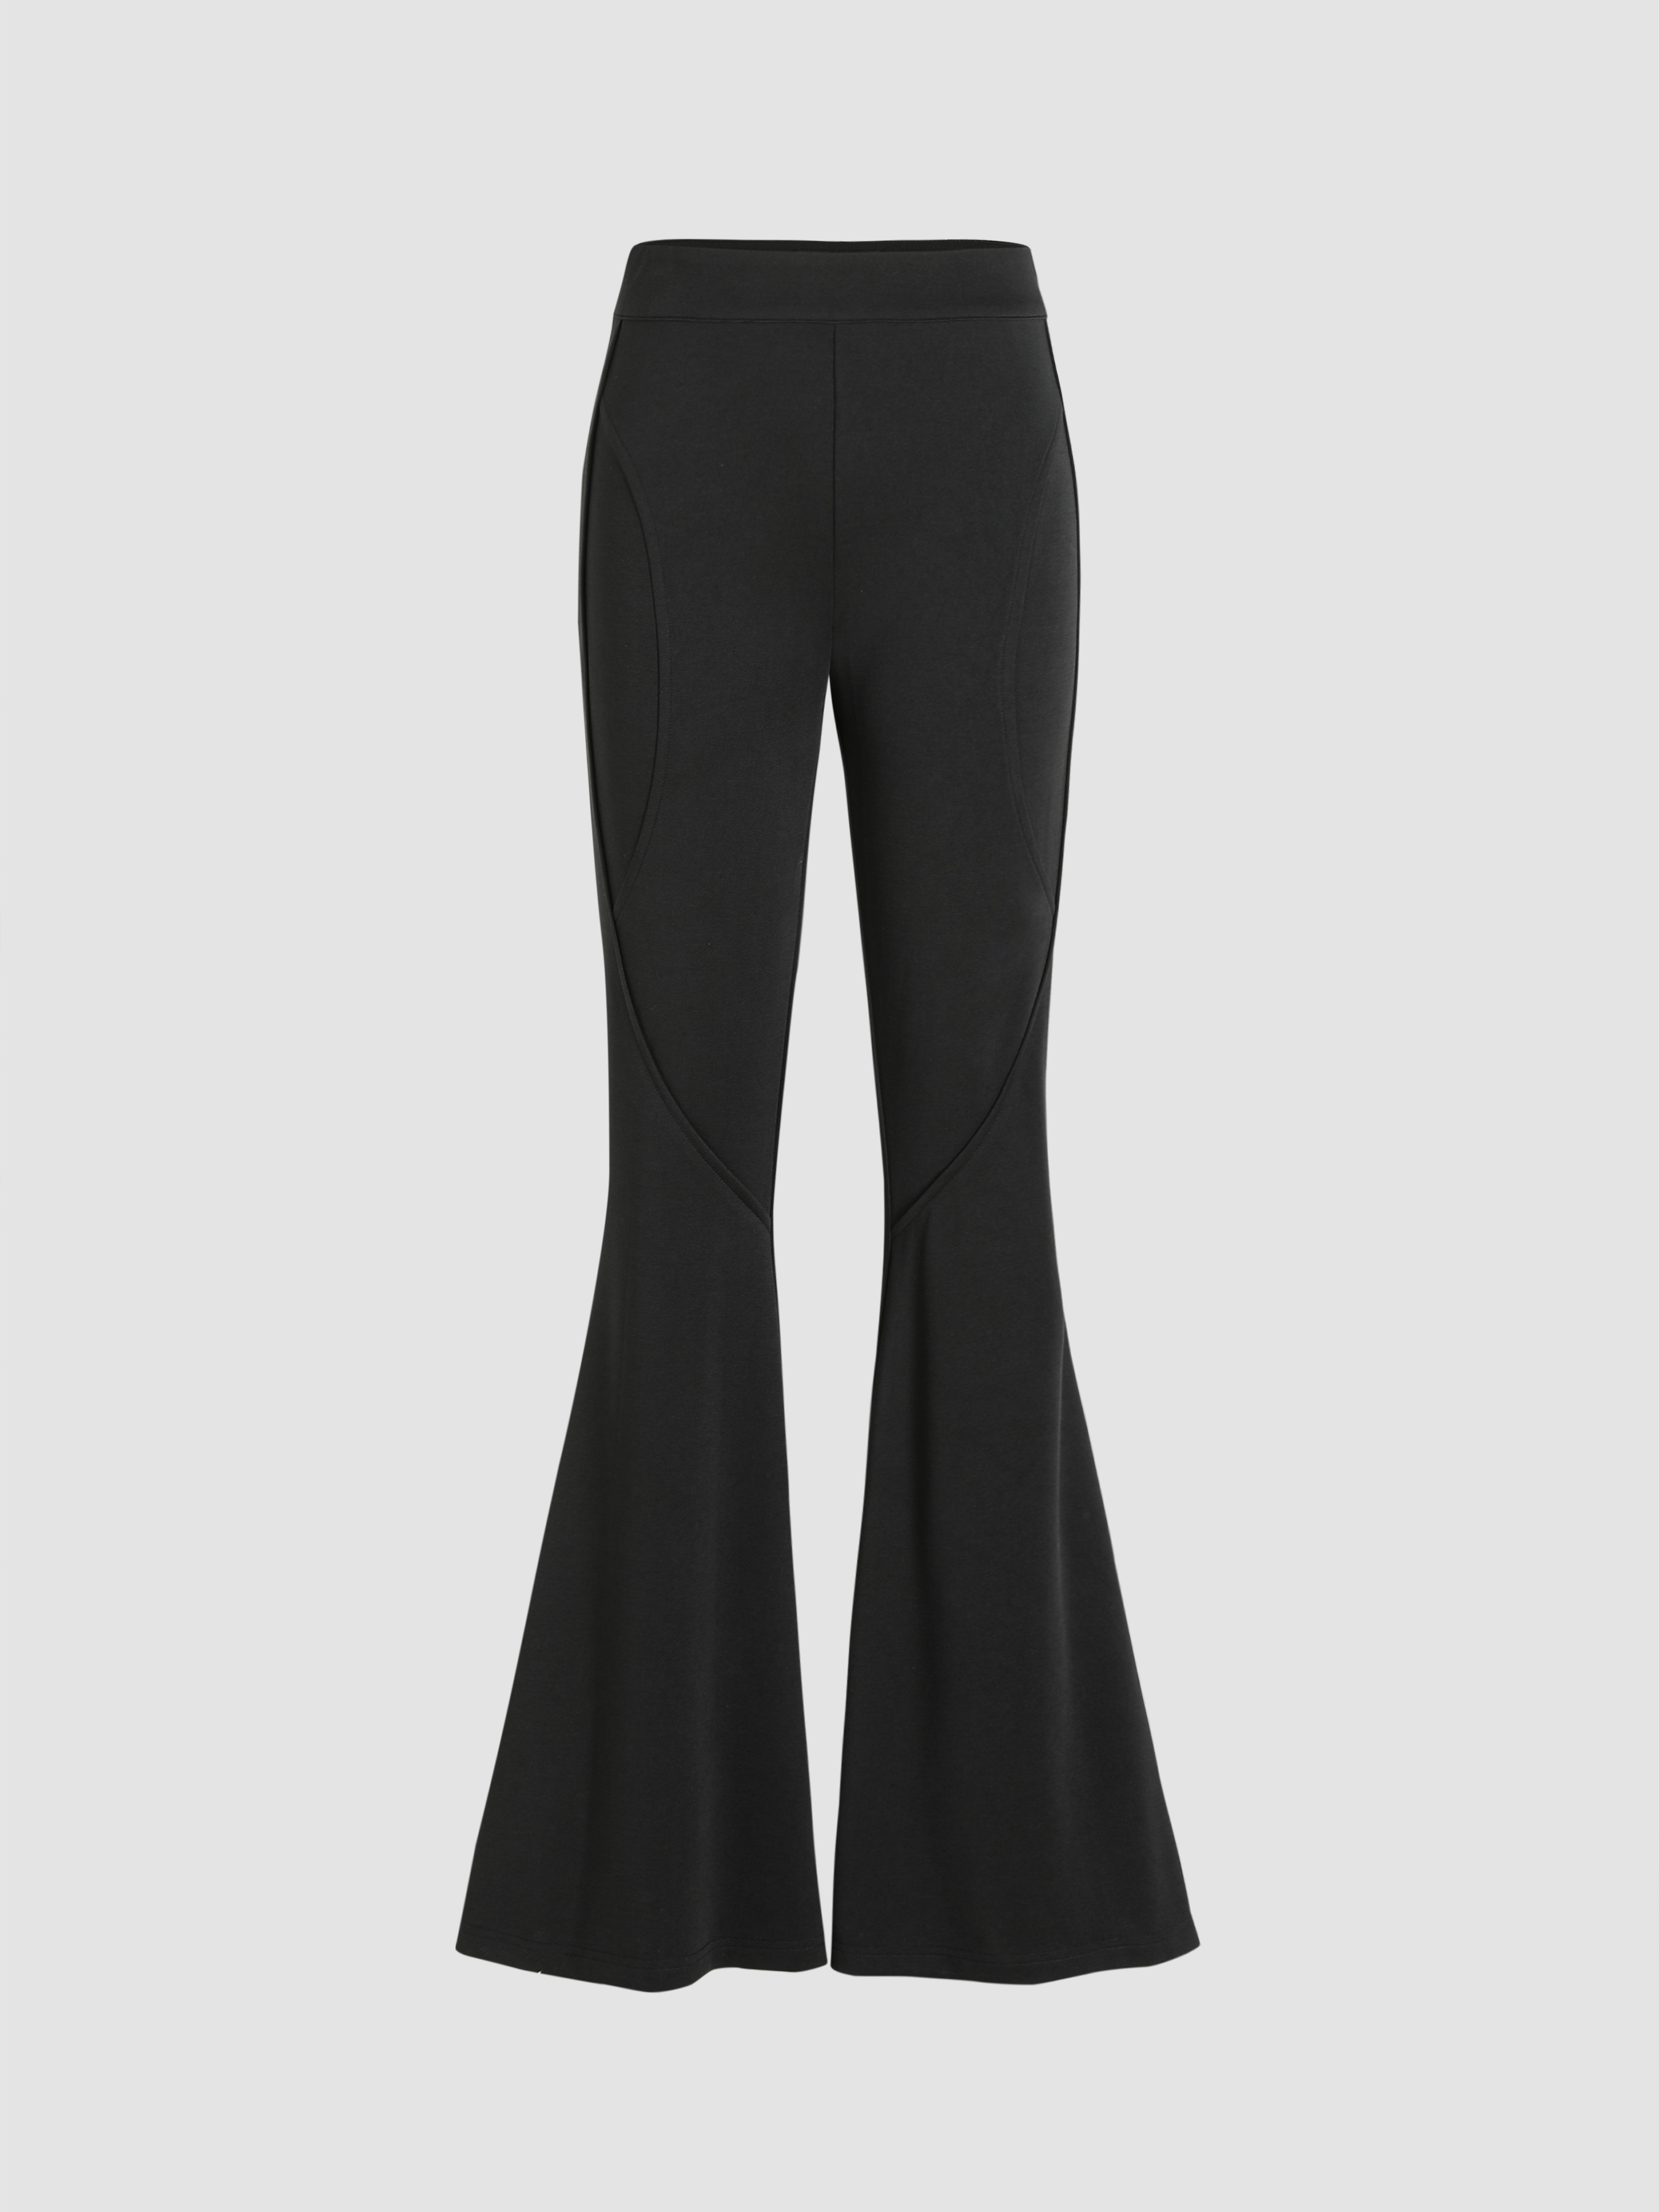 The Everyday Essential Black Flare Trousers - Cider